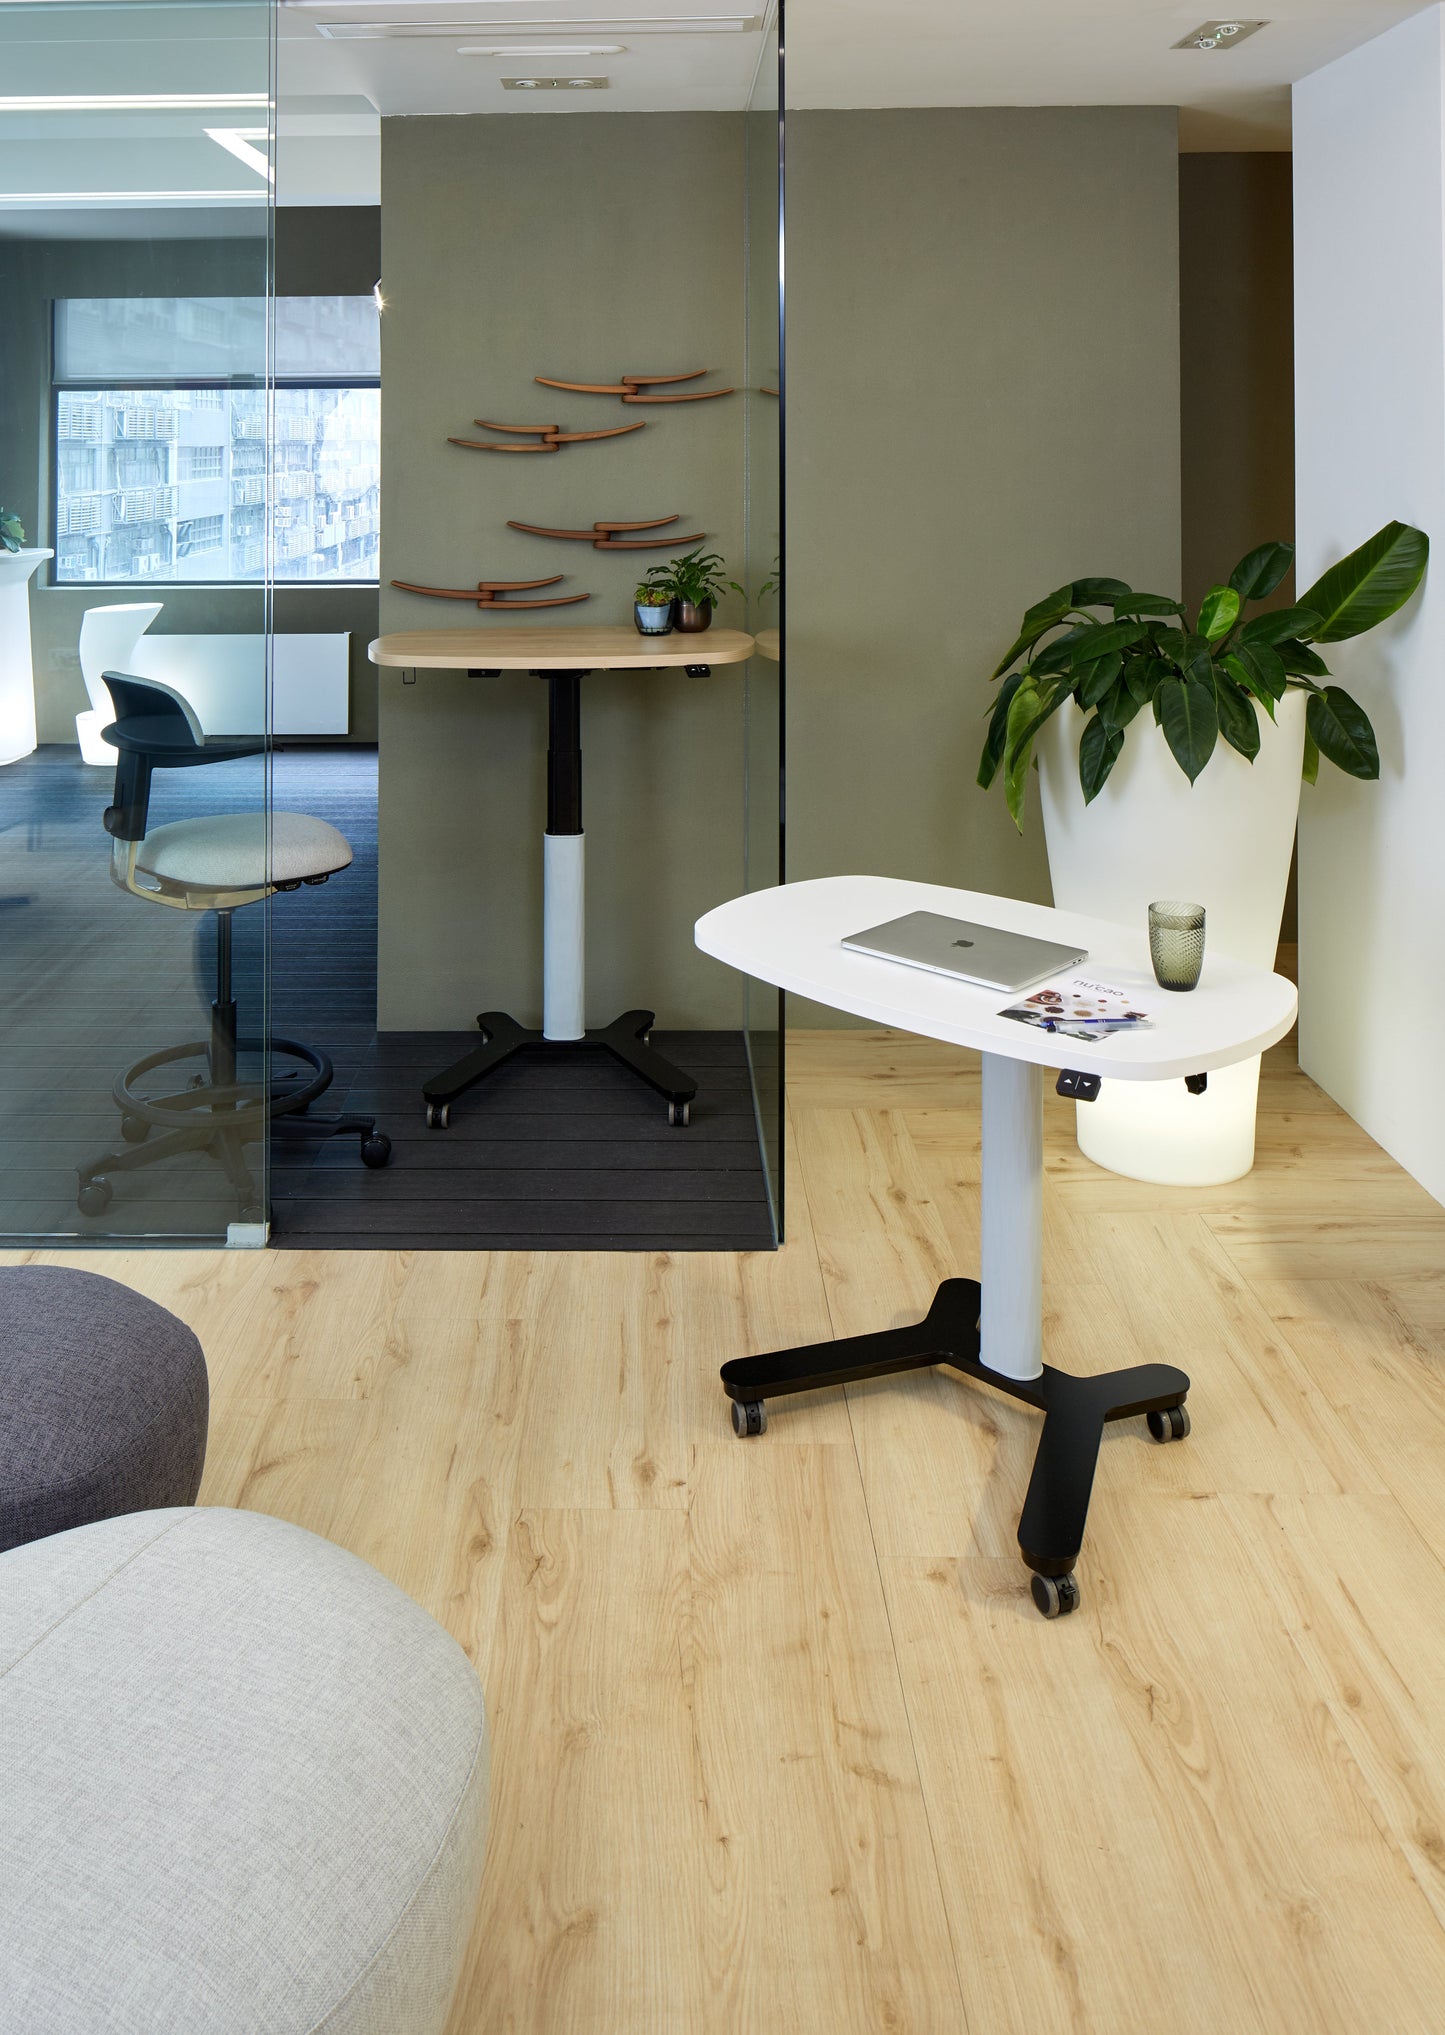 OITTO AGILE sit + stand desk (with Li battery)